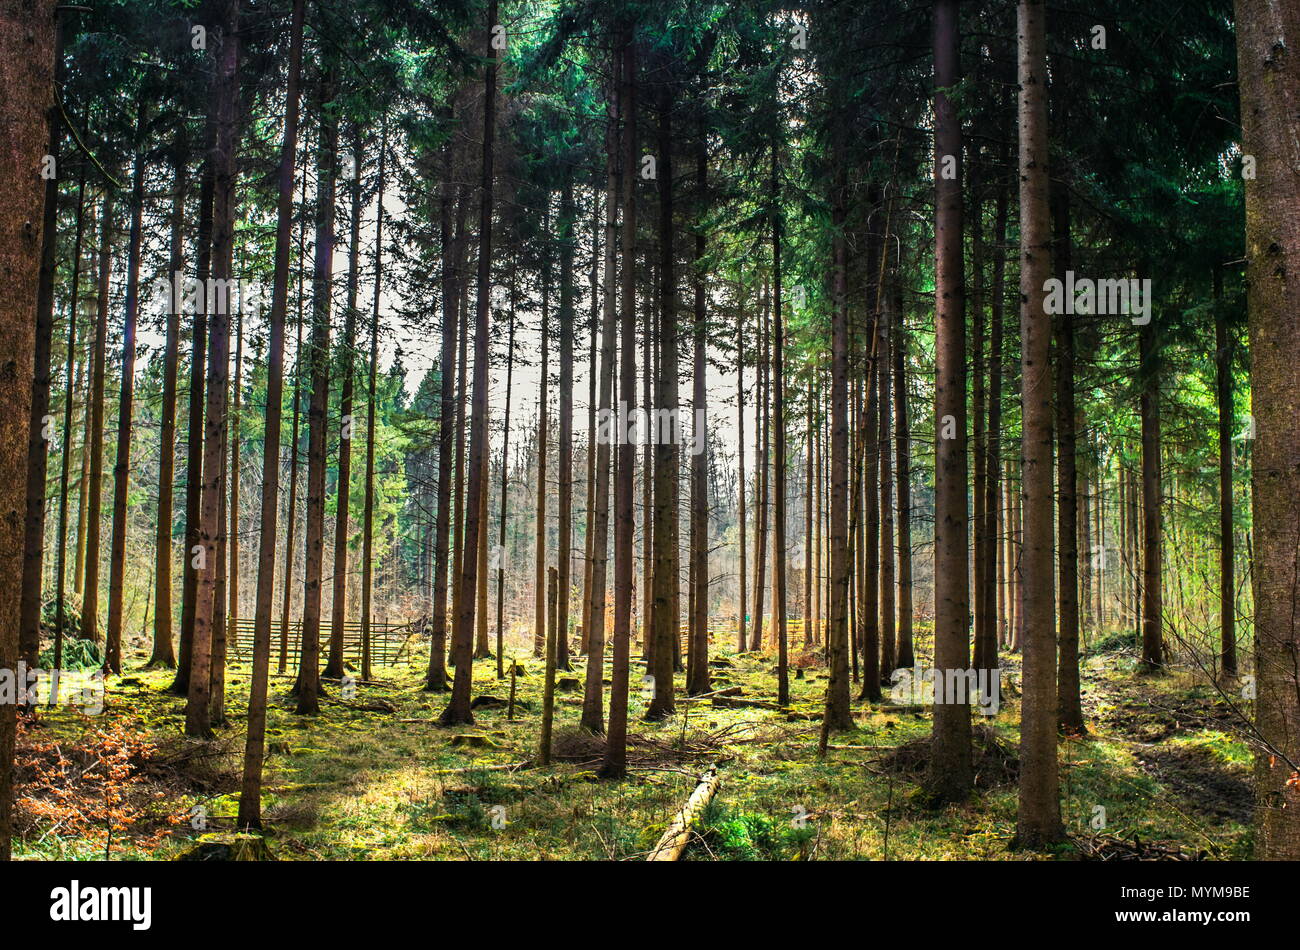 Backlit forest scene tall trees, green leafs, soft warm light Stock Photo